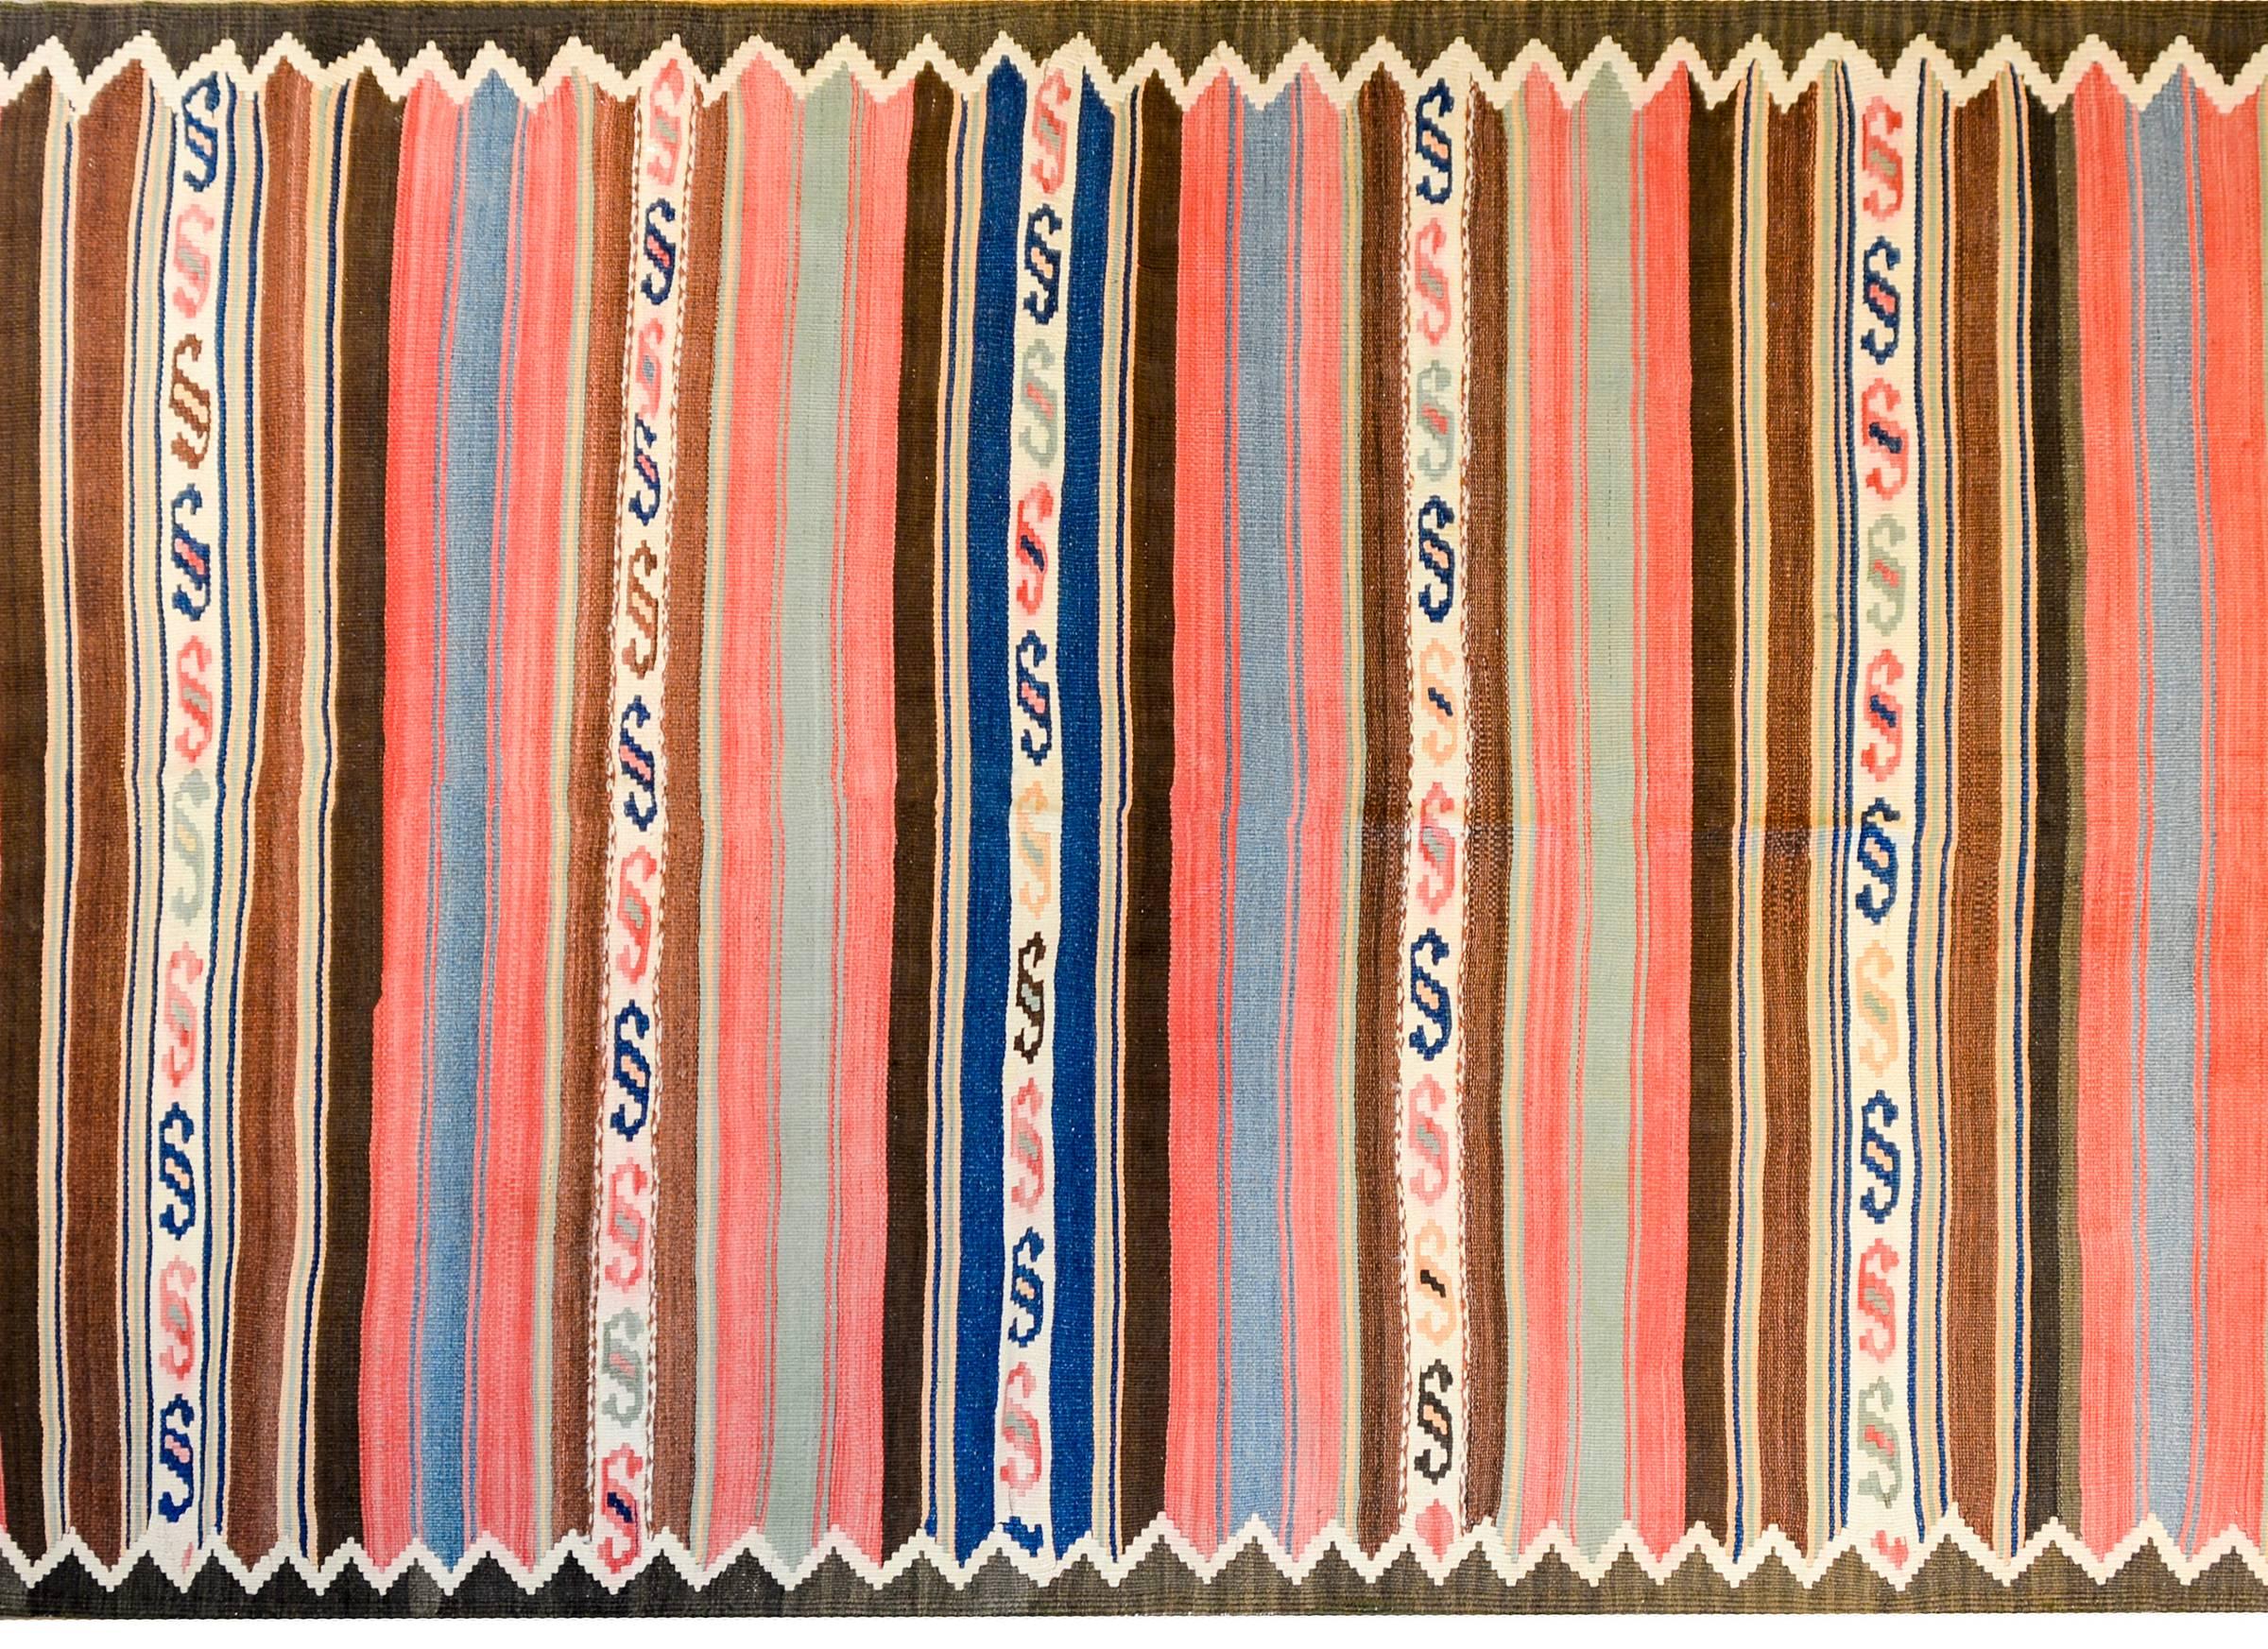 A wonderful early 20th century Persian Shahsevan Kilim runner with alternating boldly colored multicolored stripes of geometric and striped design. The border is thin, with a triangle and zigzag pattern.